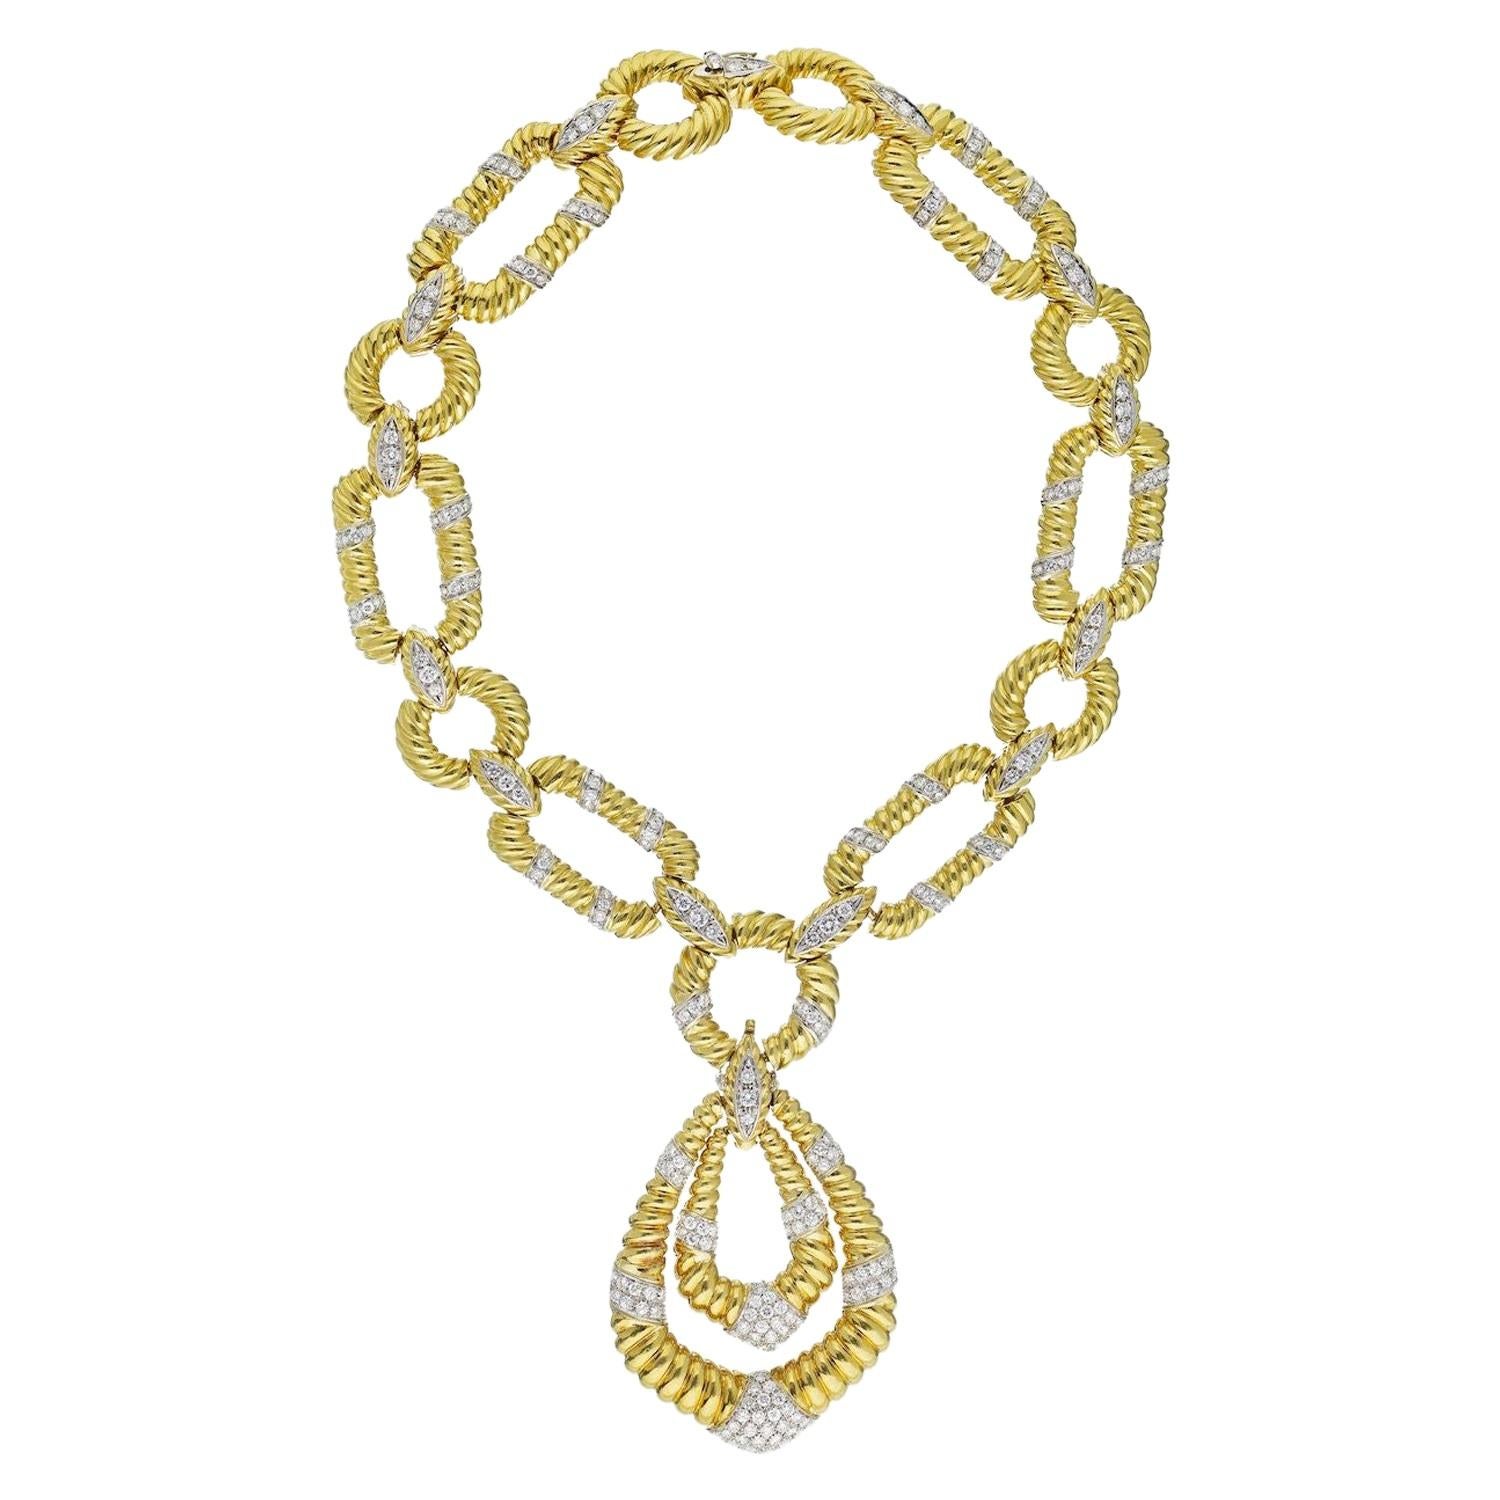 1970's Platinum & 18K Yellow Gold Twist Open Link Diamond Accented Necklace